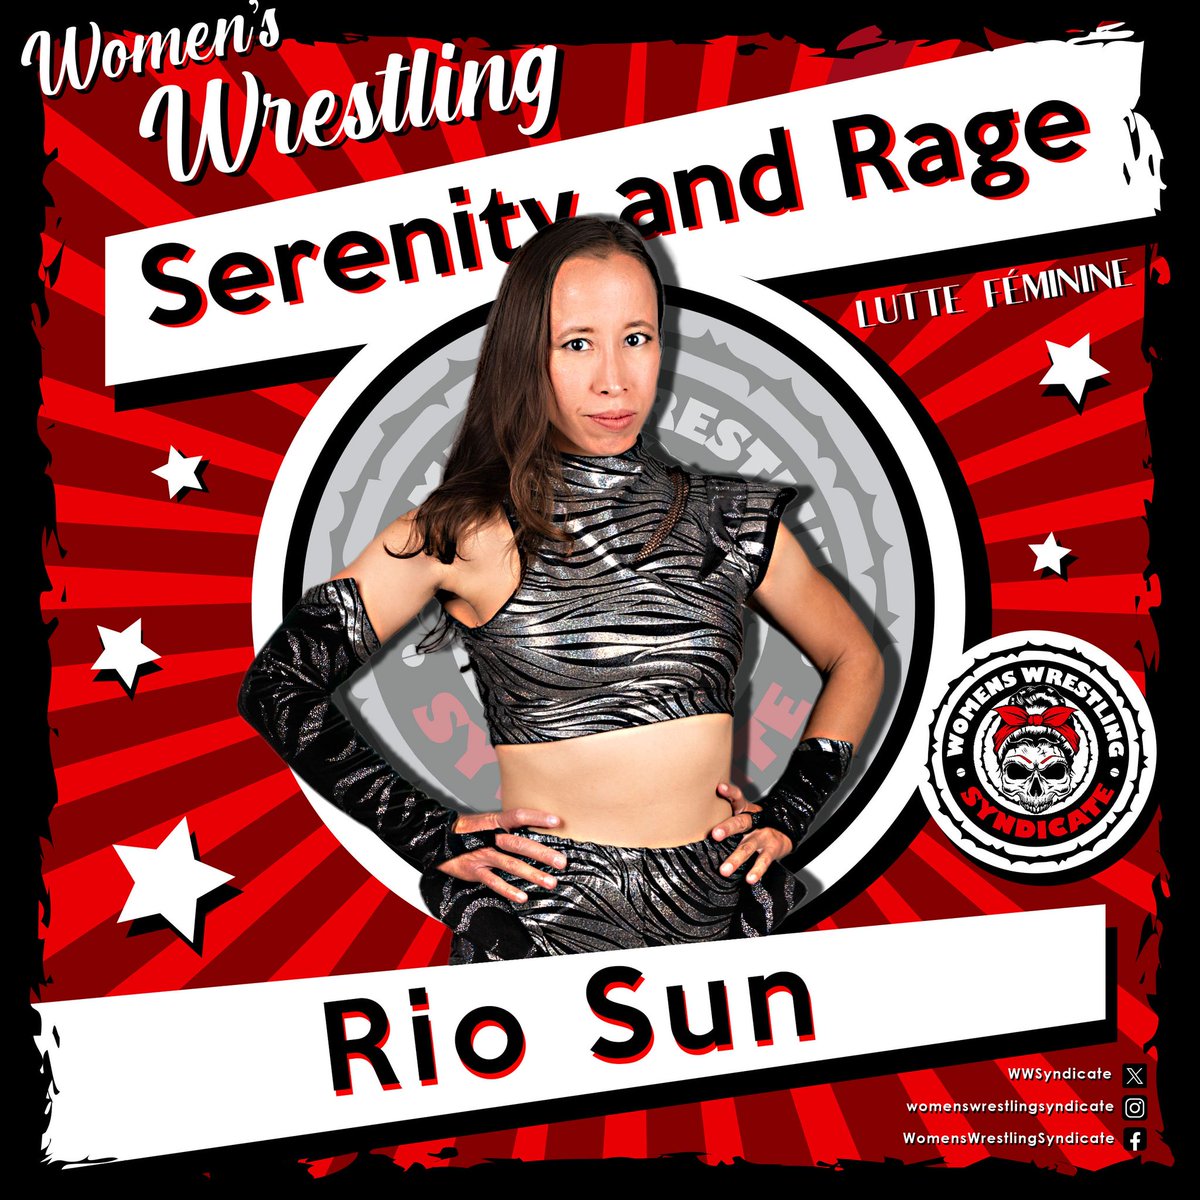 WWS TALENT ANNOUCEMENT “Serenity and Rage” Rio Sun joins @WWSyndicate! Get your tickets now for “AYOYE! Tu m’fais mal” presented by Women’s Wrestling Syndicate on Sunday, May 19, 2024, at 2PM here: thepointofsale.com/tickets/wws-20…